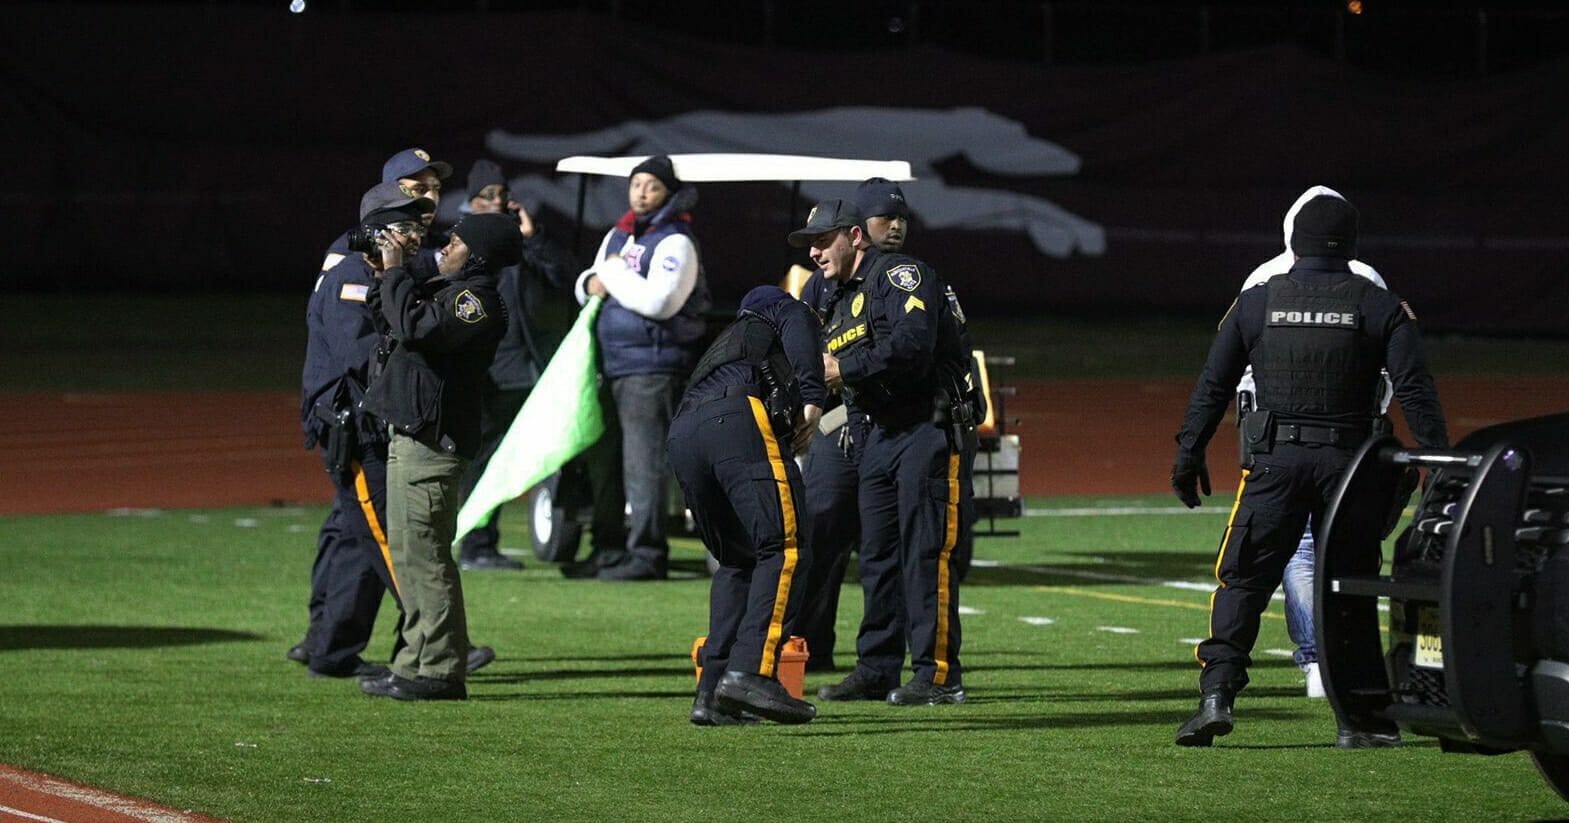 Police investigate the scene after a gunman shot into a crowd of people during a football game at Pleasantville High School in Pleasantville, New Jersey, on Nov. 15, 2019.